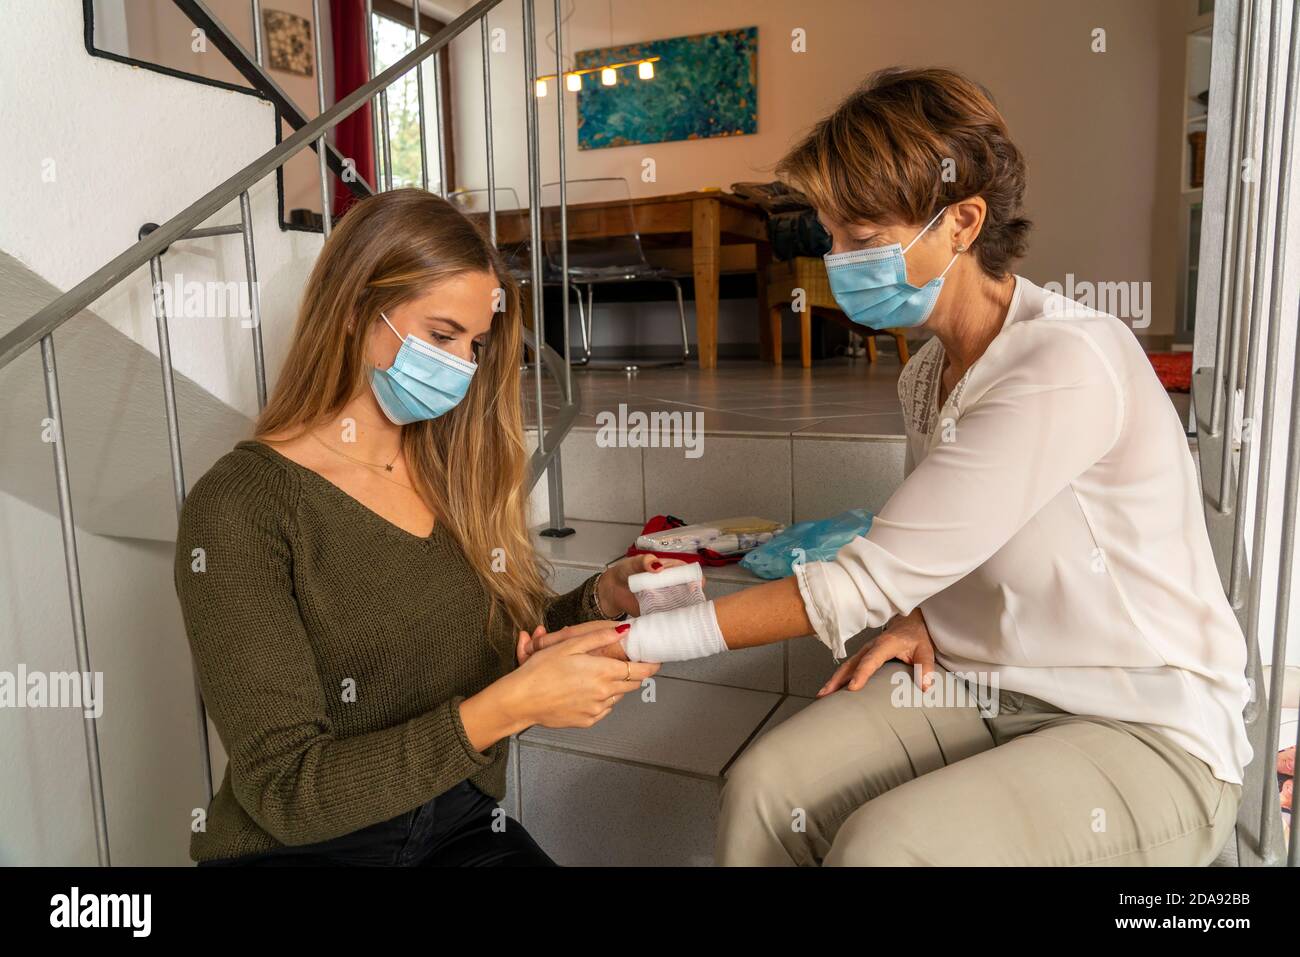 First aid measures under corona conditions, application of a bandage, after an accident in the home, with a nose-and-mouth mask, when giving first aid Stock Photo